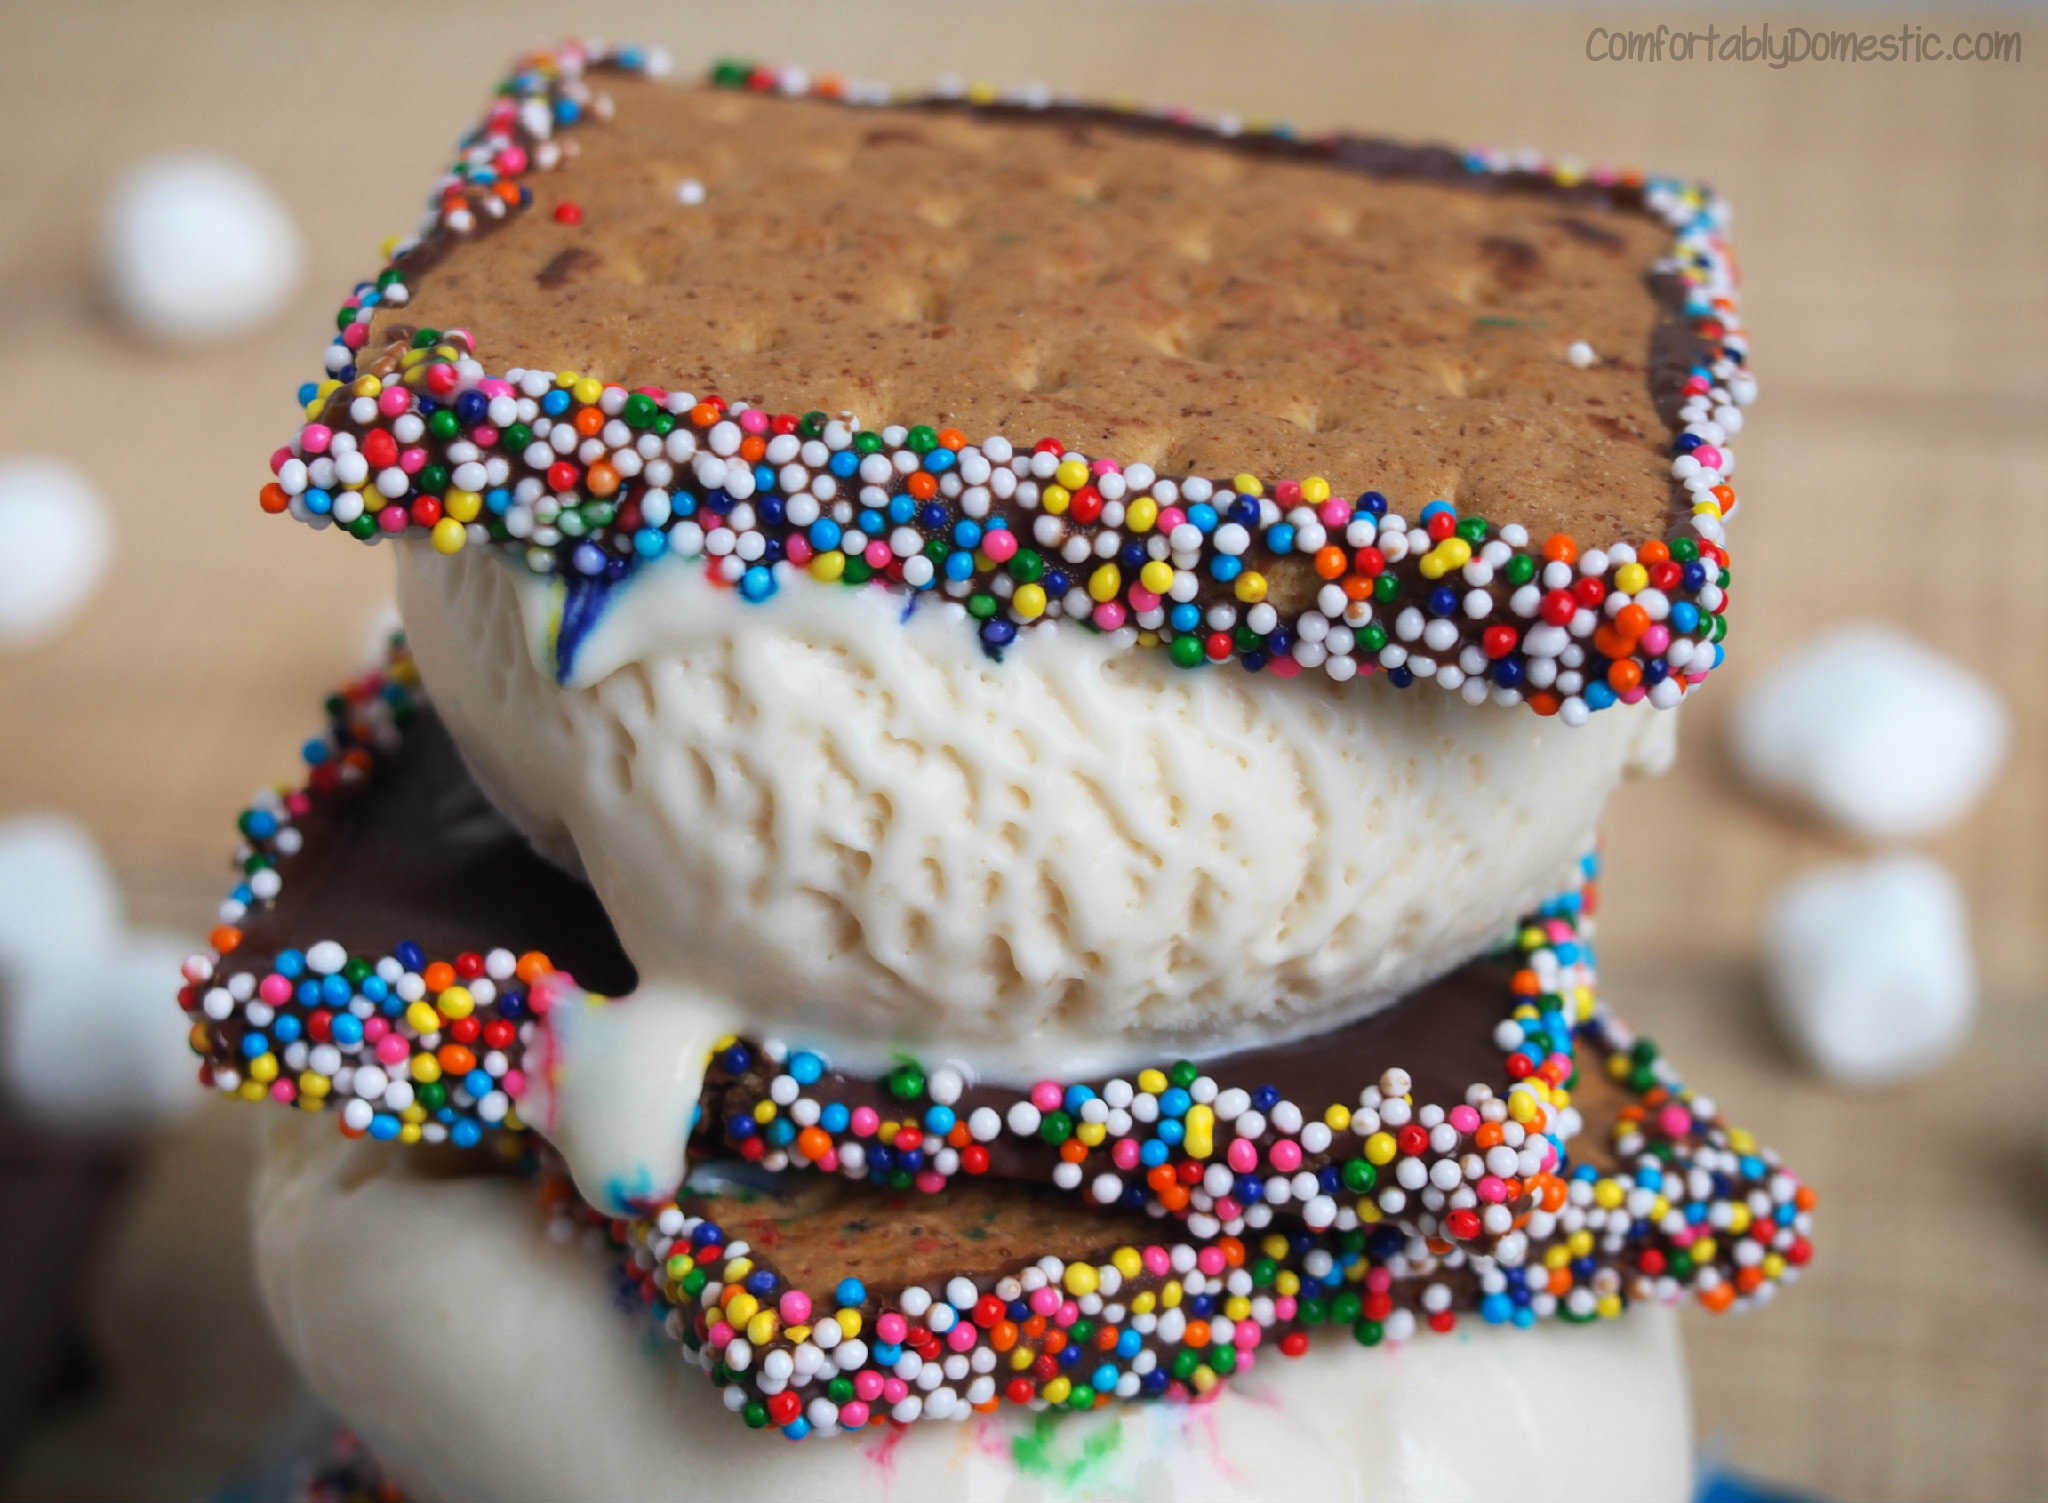 S'mores Ice Cream Sandwiches made with Toasted Marshmallow Malt Ice Cream | ComfortablyDomestic.com